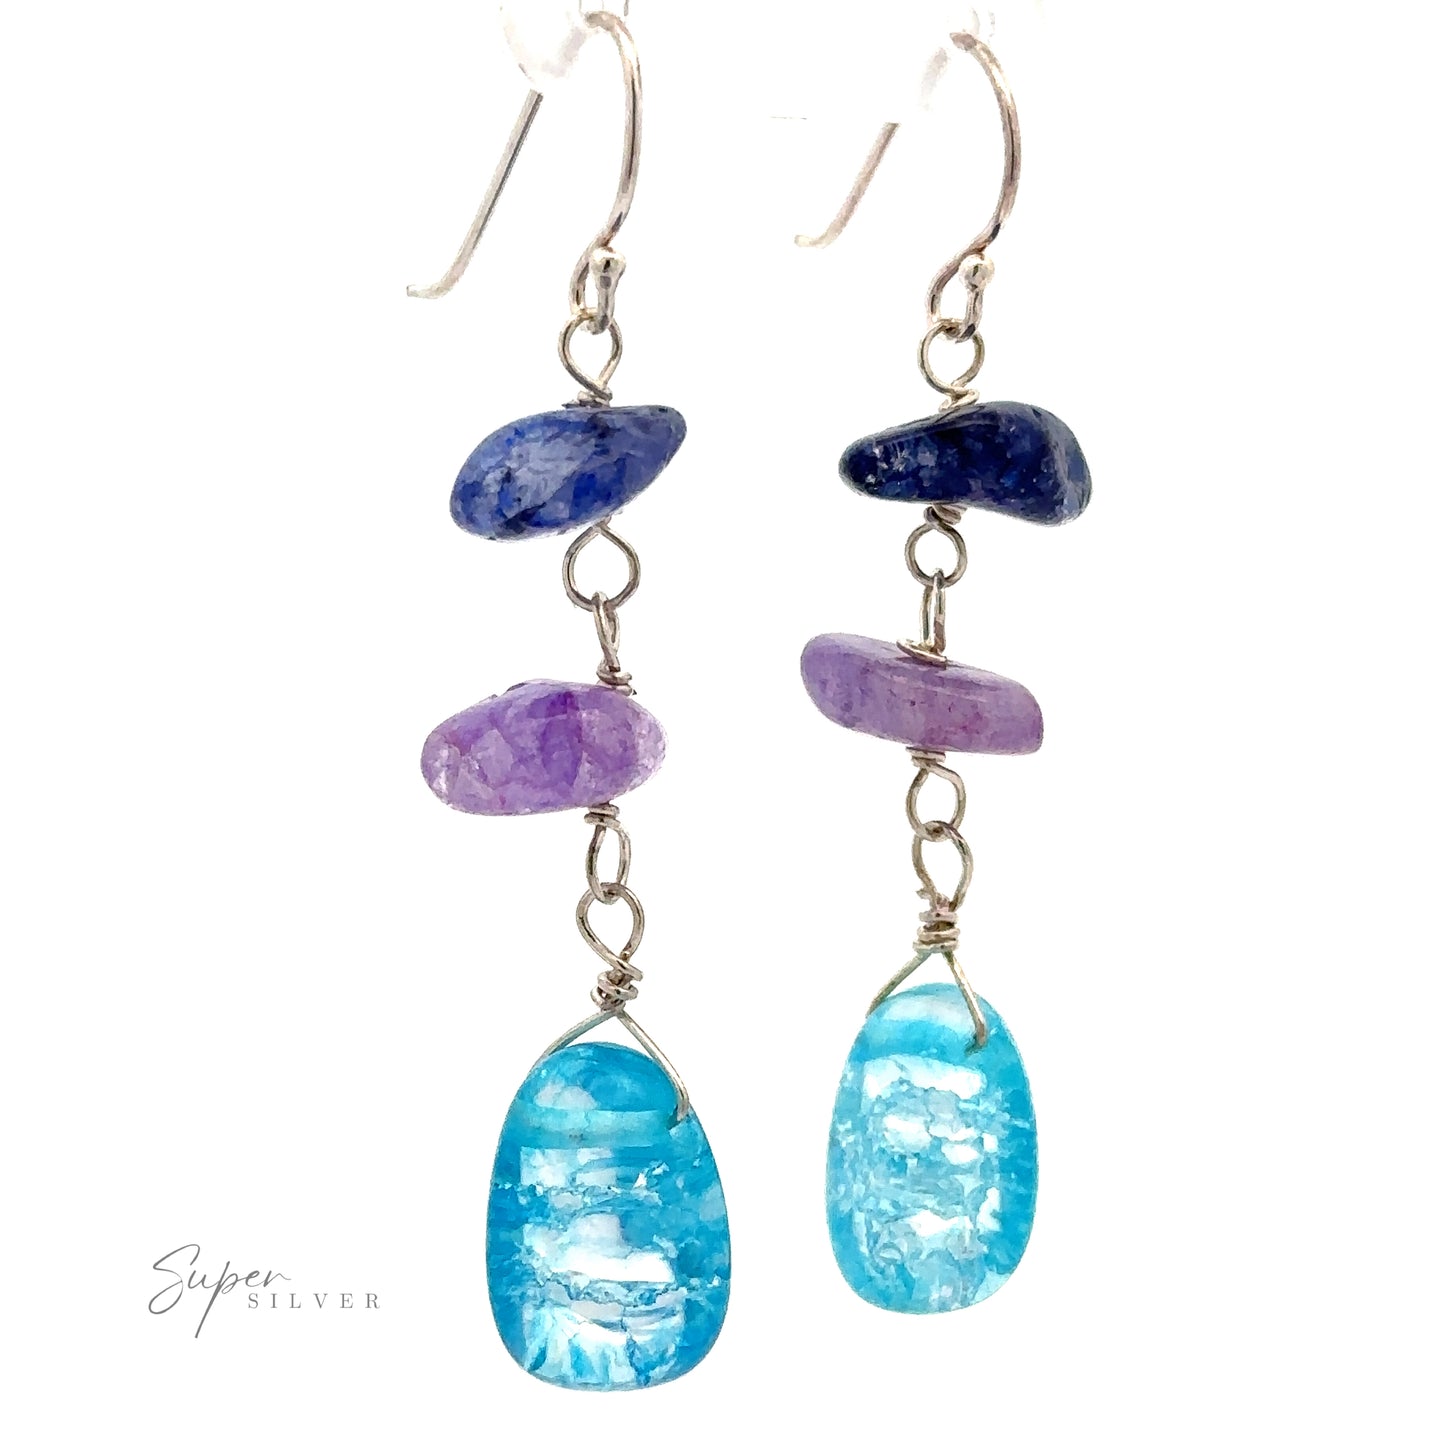 Earrings featuring three stacked stones in shades of blue and purple beads, connected by Sterling Silver wire and hooks. The print reads "Beaded Blue and Purple Earrings.